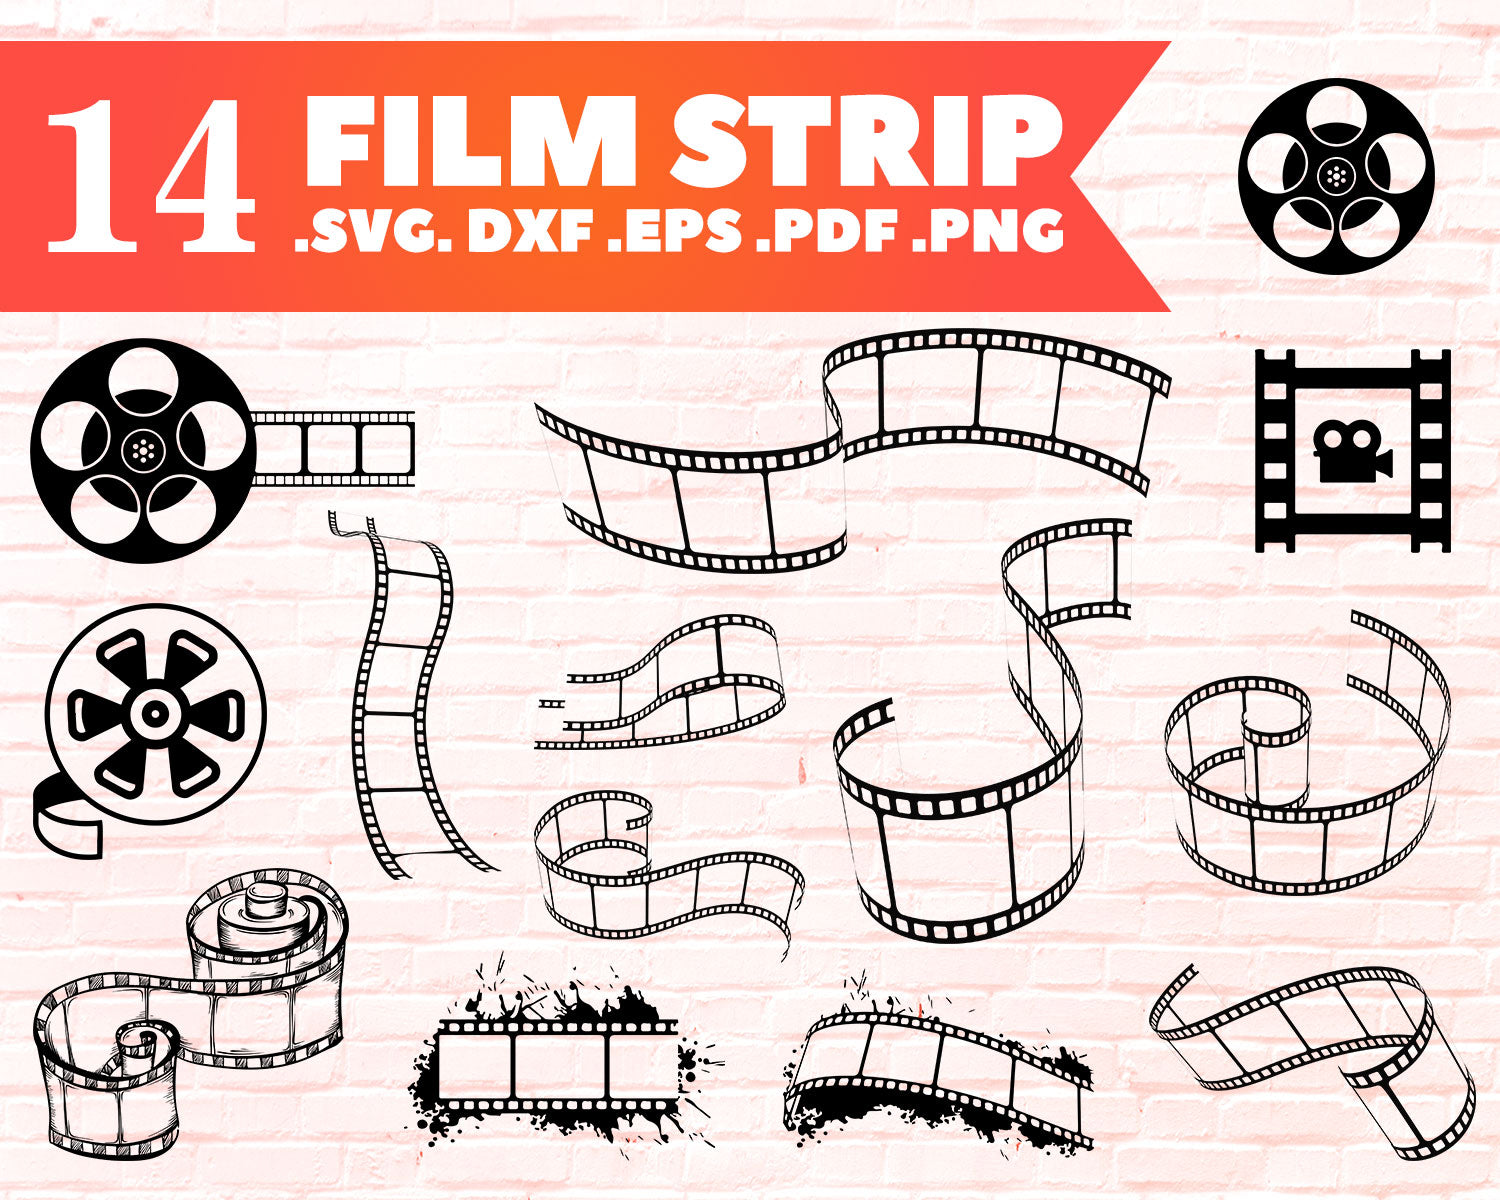 Download Clip Art Art Collectibles Film Cut File Movie Cricut Film Reel Svg Movie Reel Vector Movie Silhouette Film Svg Dxf Eps Png Jpg Movie Clipart